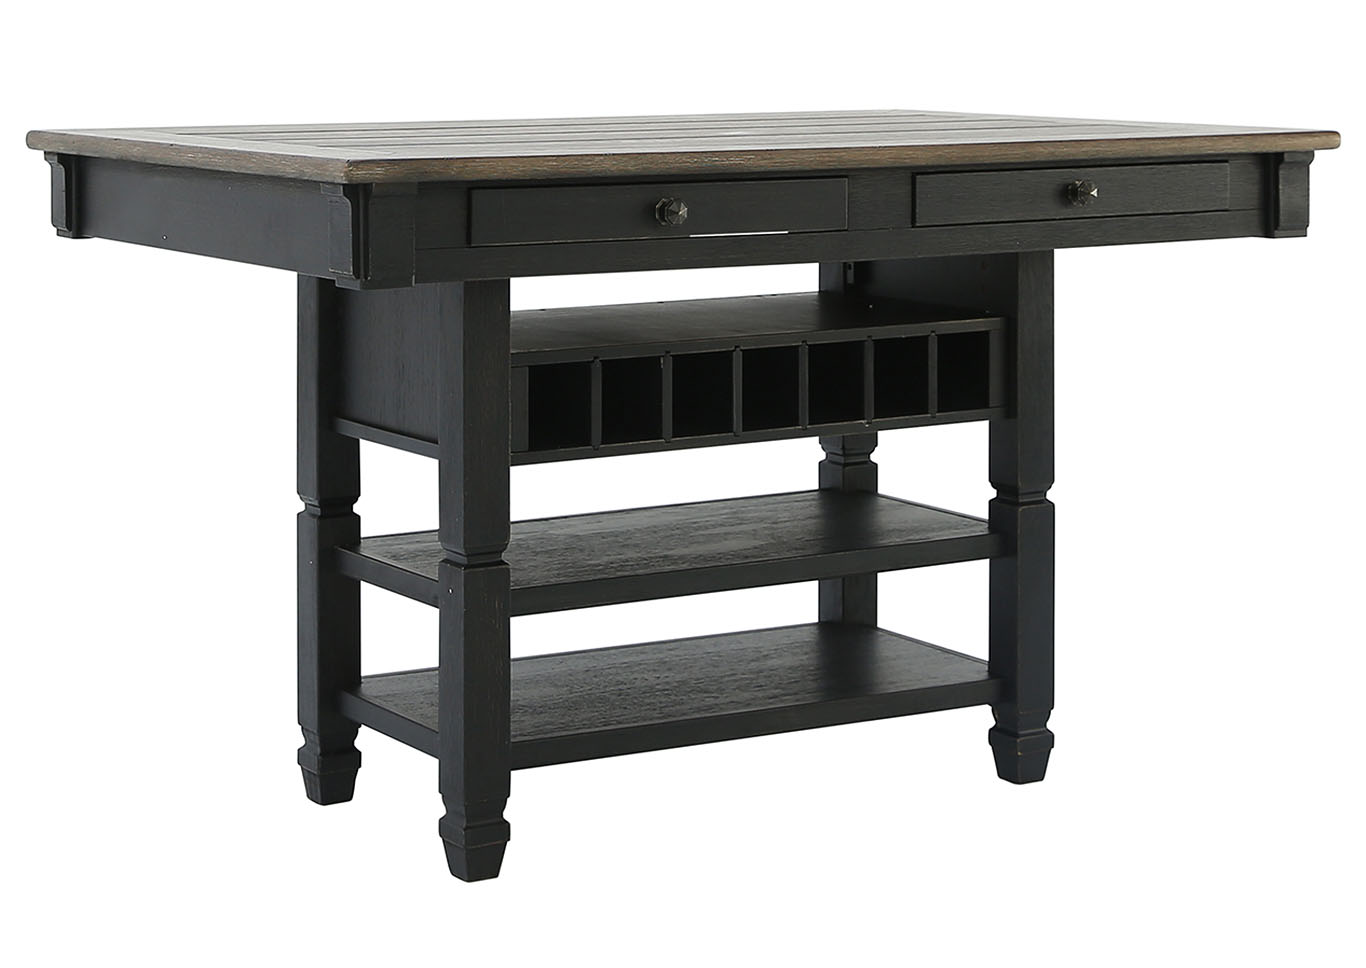 TYLER CREEK COUNTER HEIGHT DINING TABLE,ASHLEY FURNITURE INC.